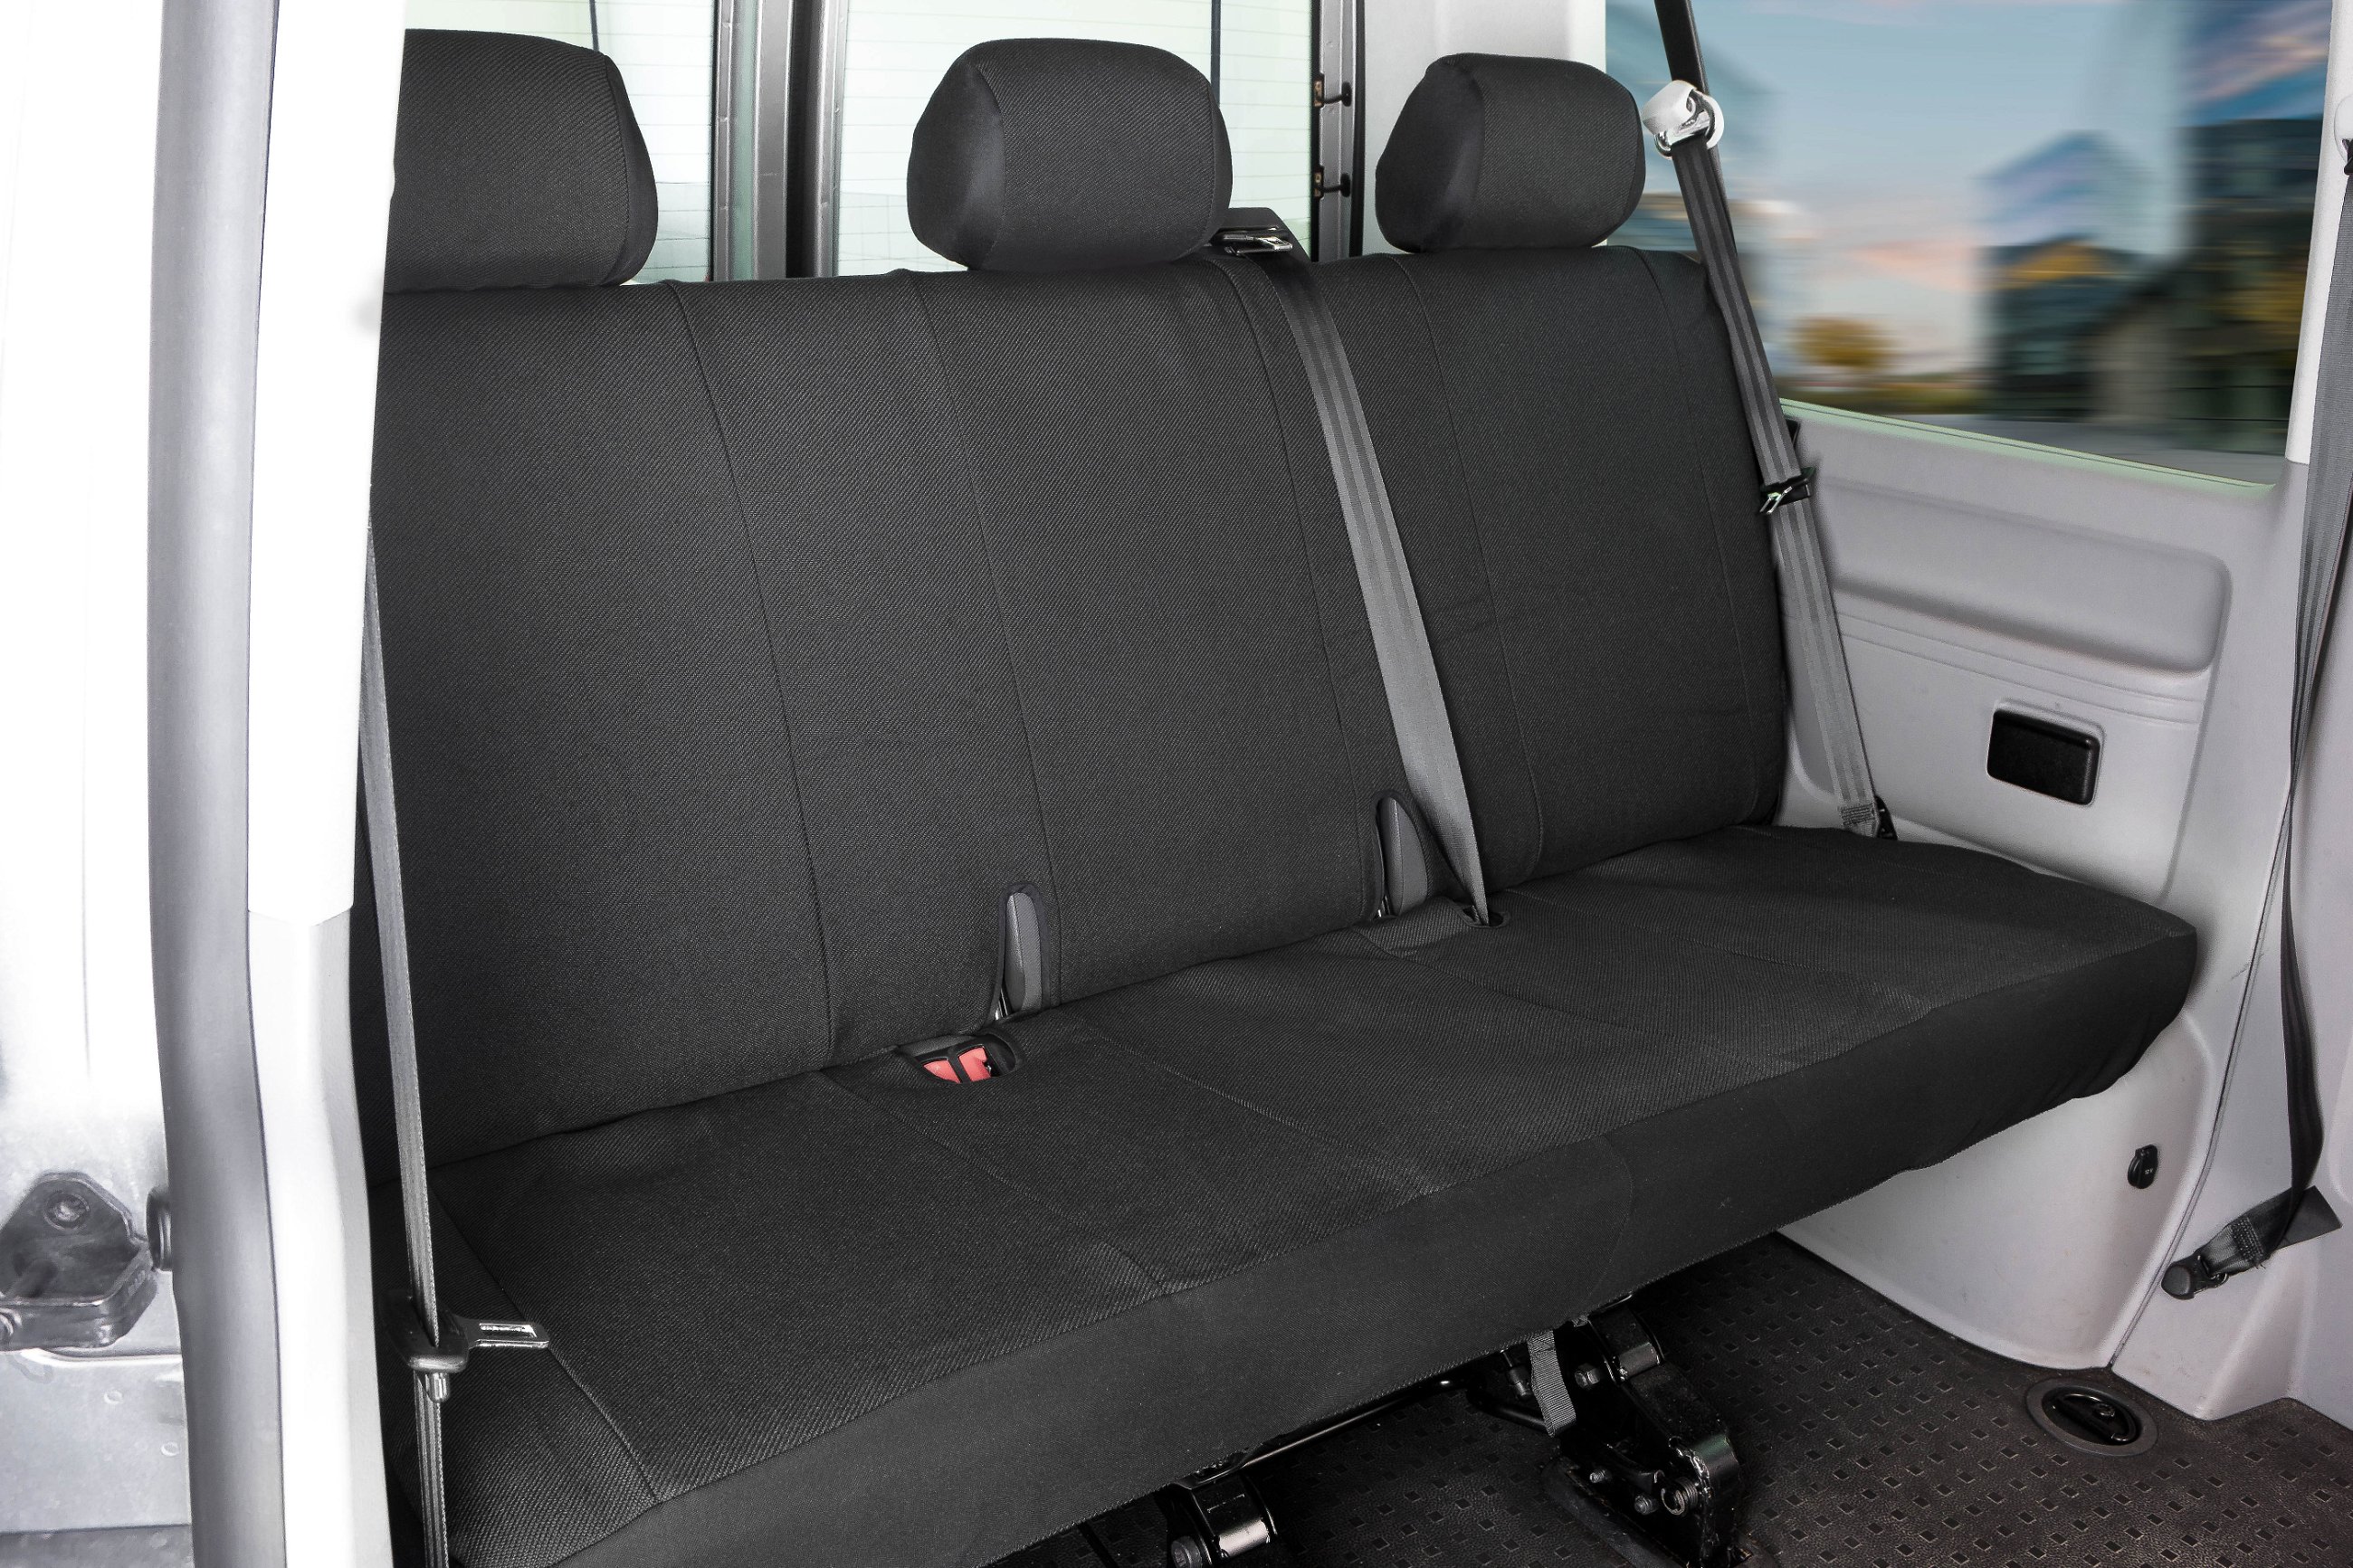 Seat cover made of fabric for VW T5, 3-seater bench cover